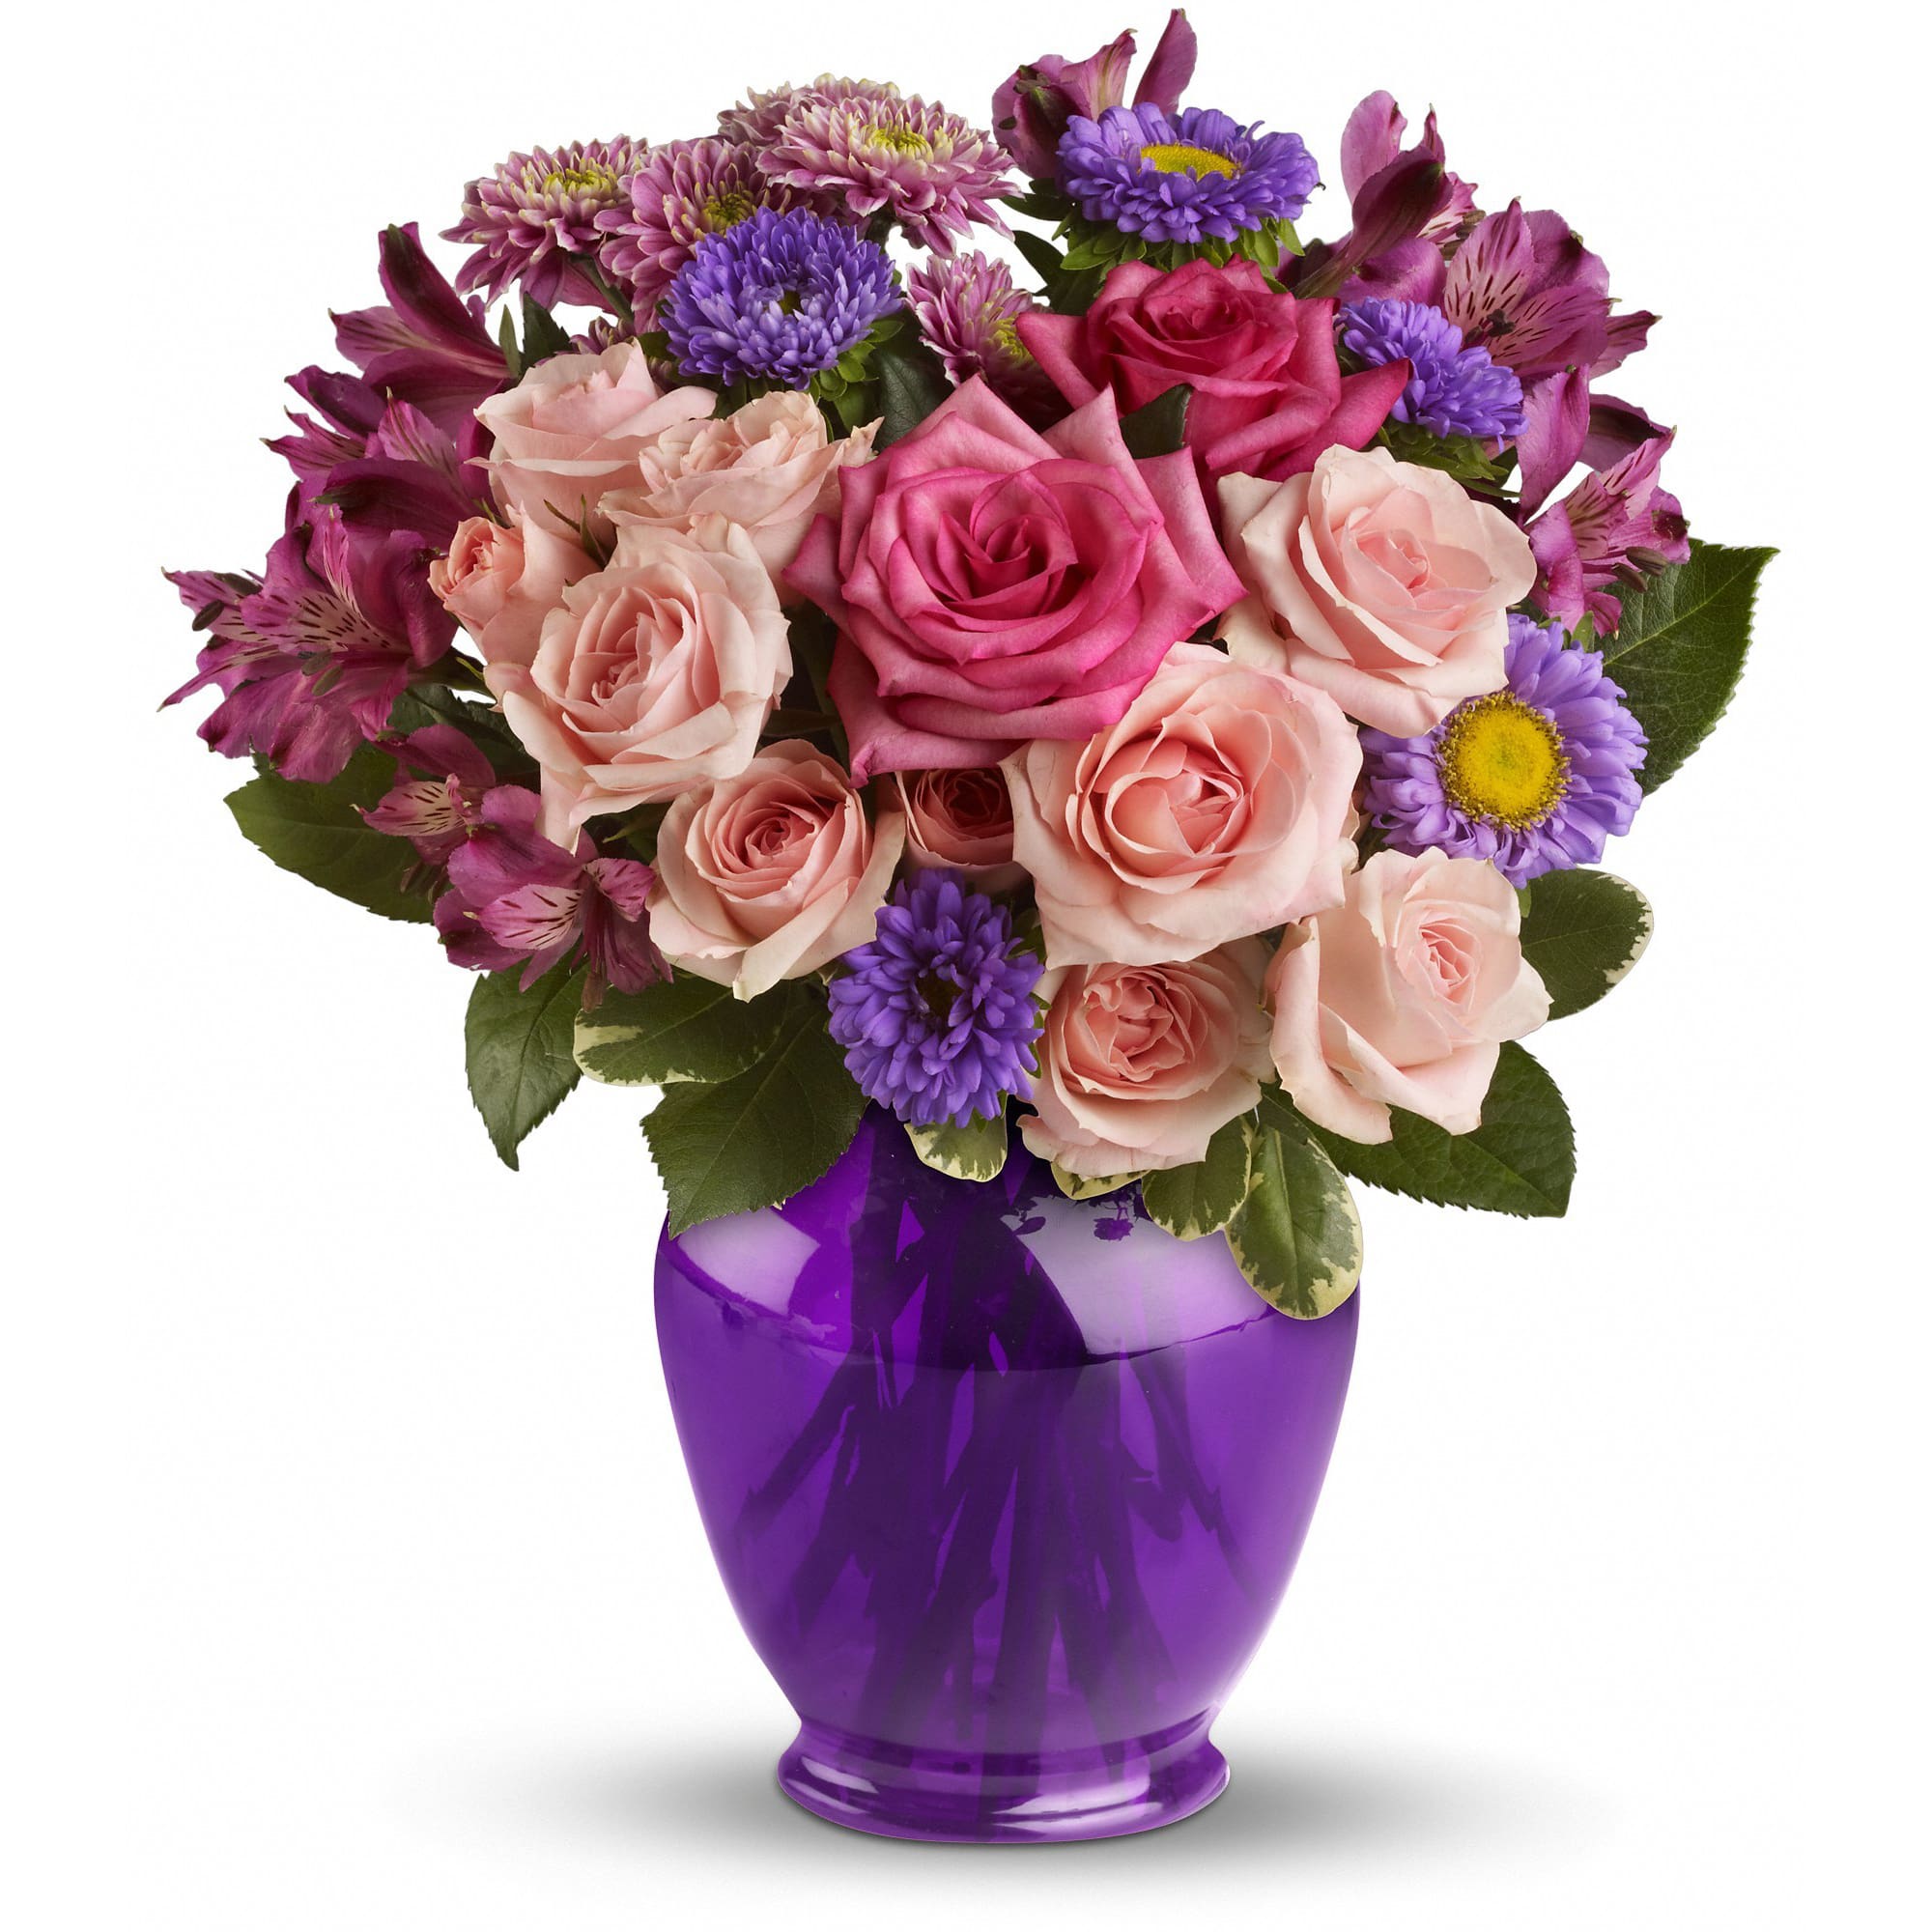 Teleflora's Purple Medley Bouquet with Roses - Impress someone special without depressing your budget. Send lush pink and lavender flowers in a classic purple ginger jar. 